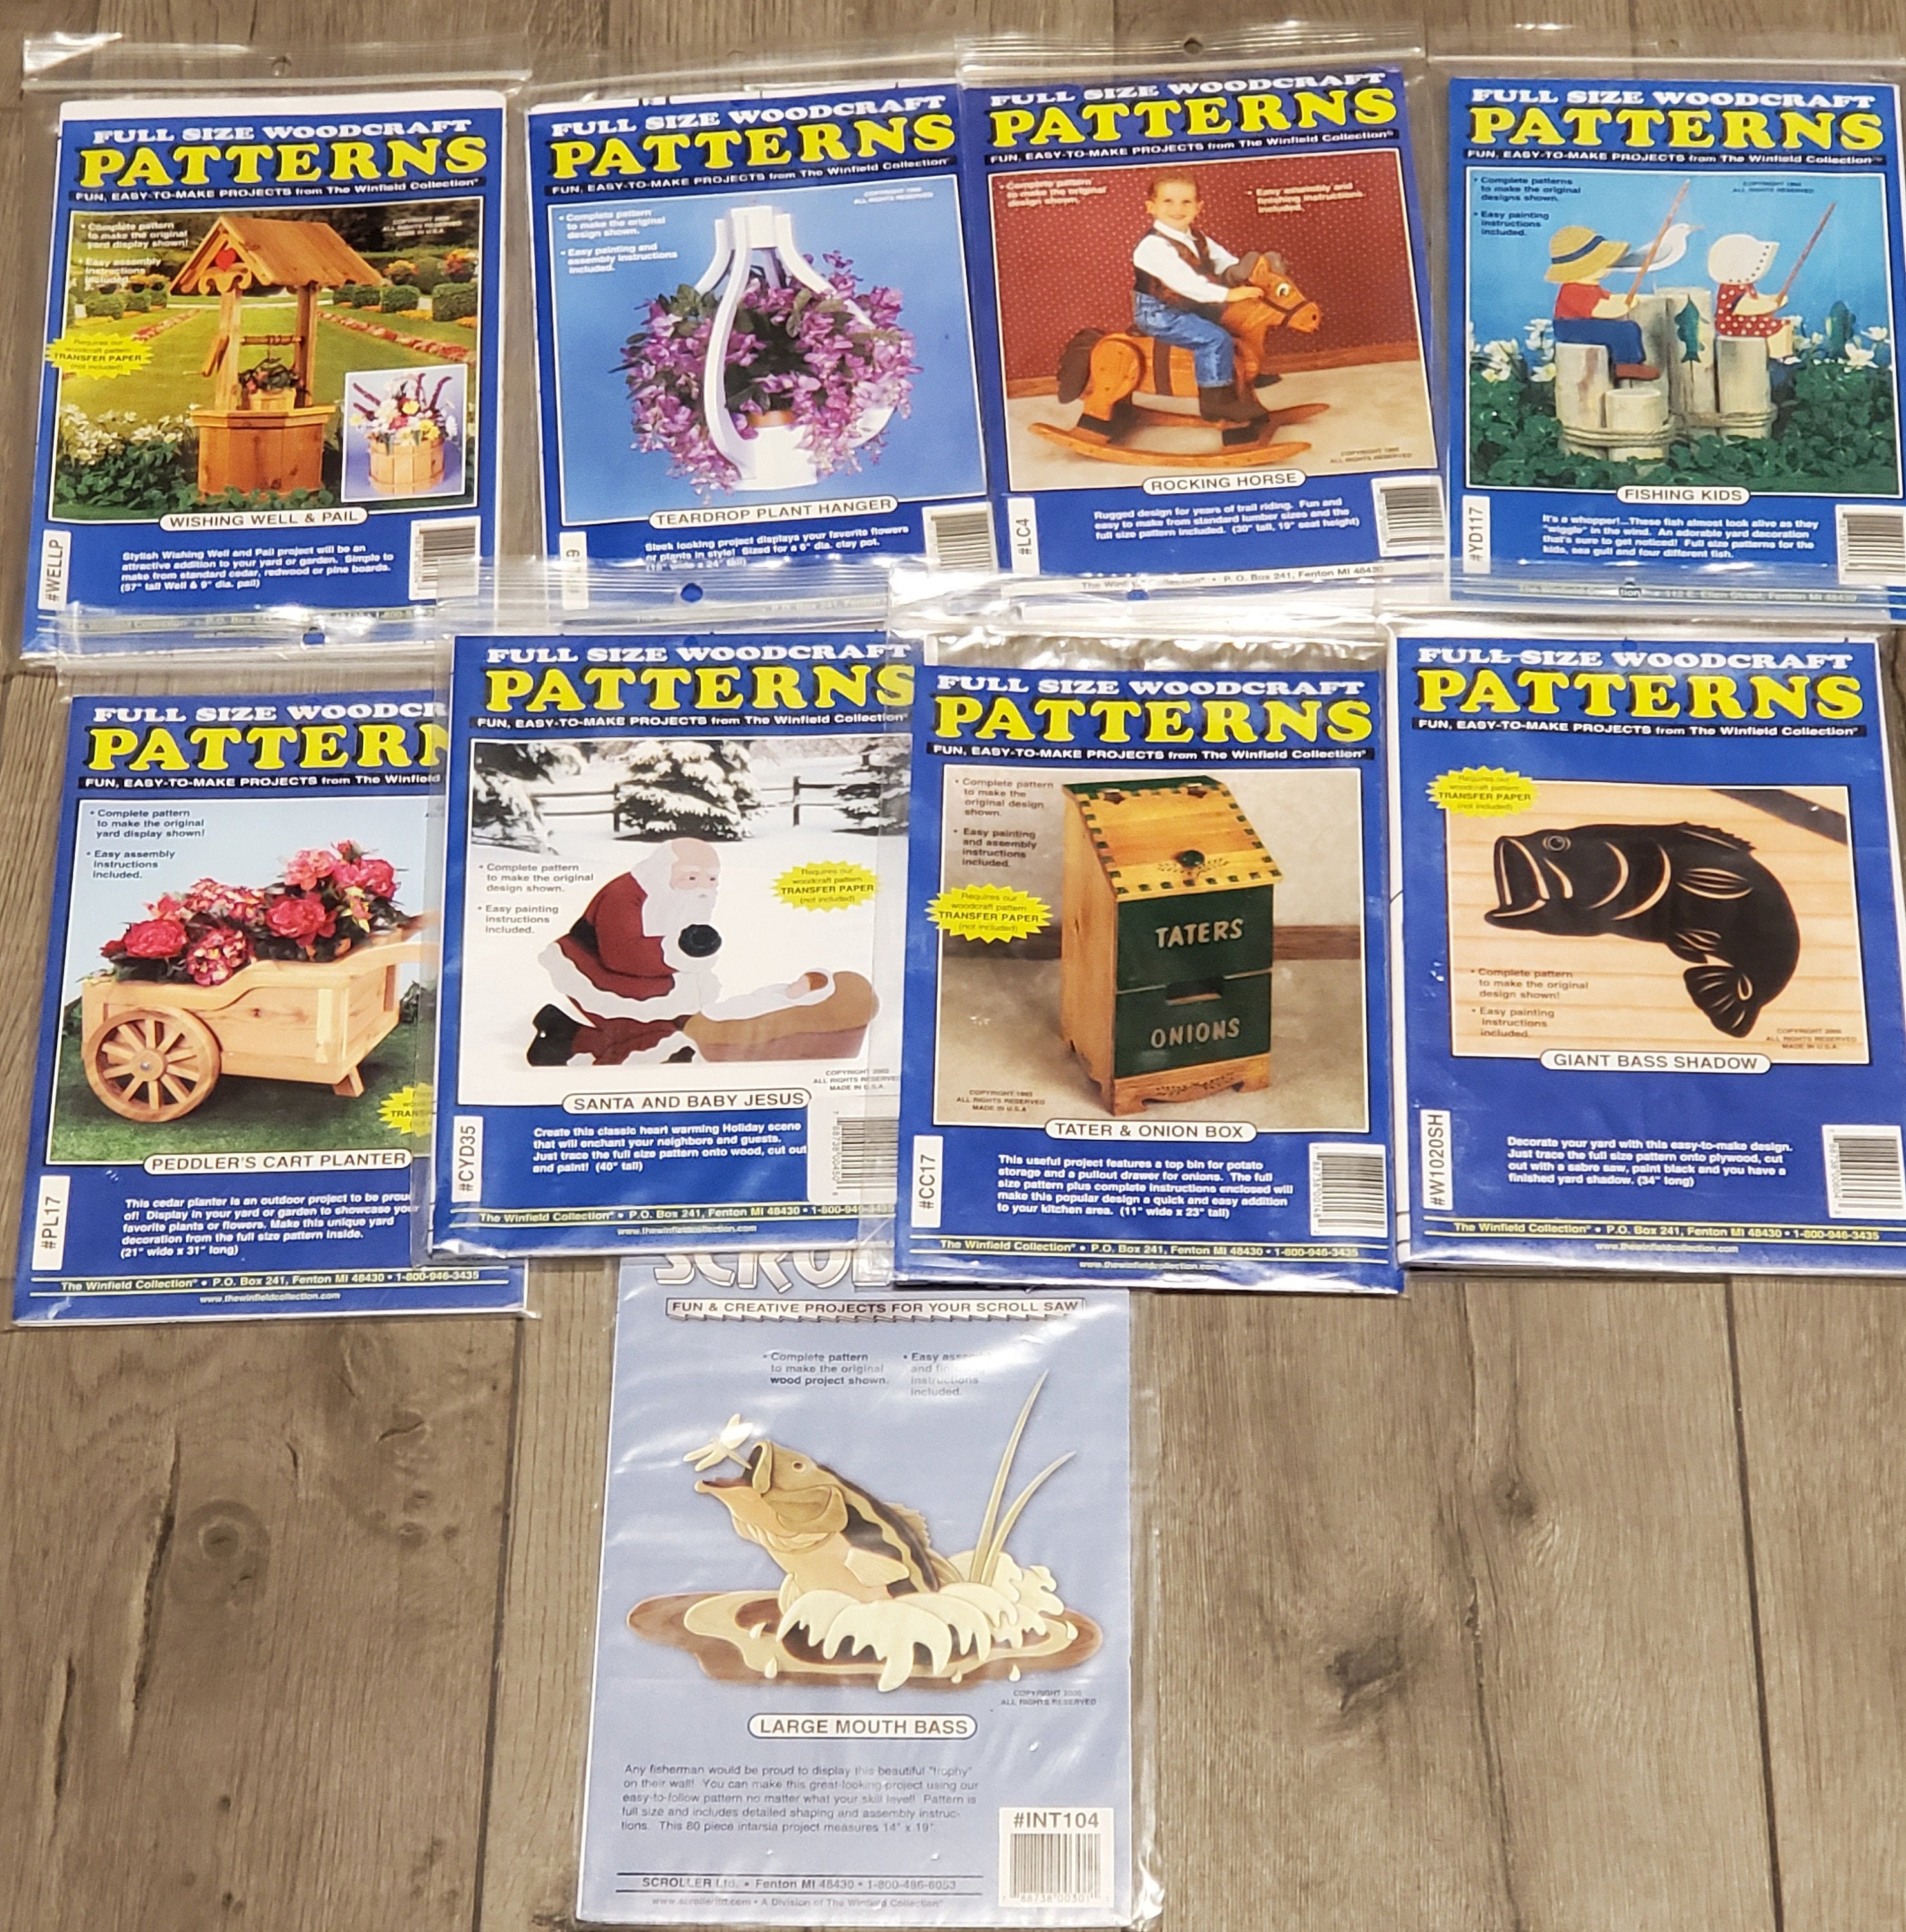 Animal Clothes Hangers Pattern, Toys & Games: The Winfield Collection